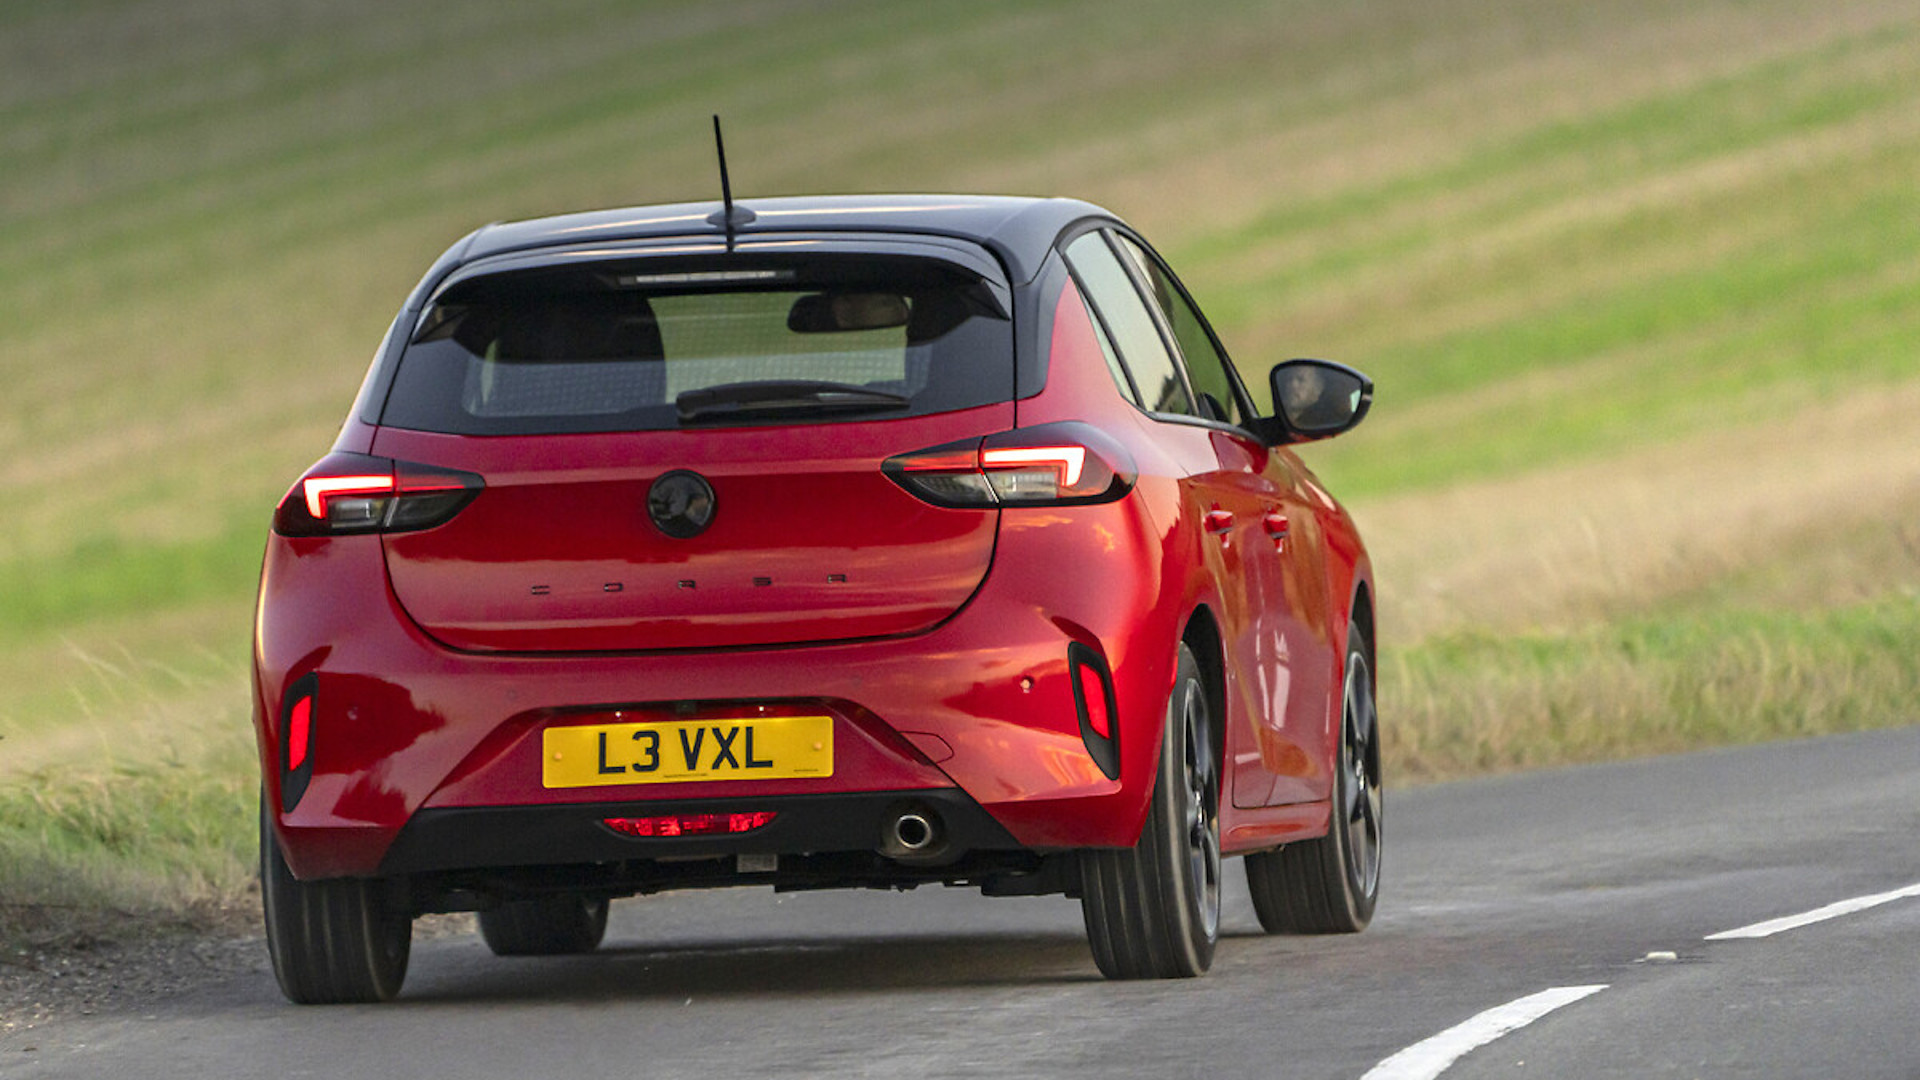 New Vauxhall Corsa features 48V hybrid powertrain for the first time